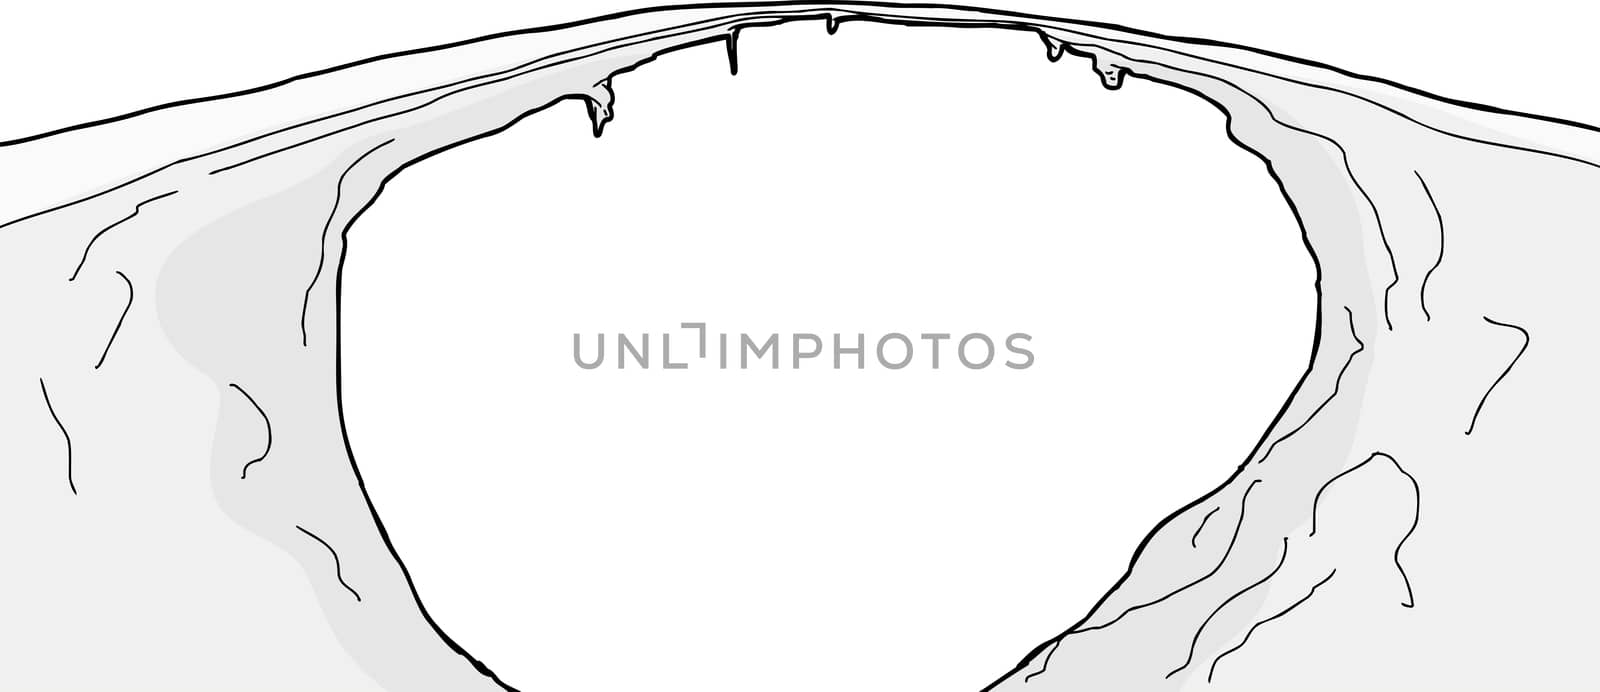 Single isolated icy bridge over abyss with white background